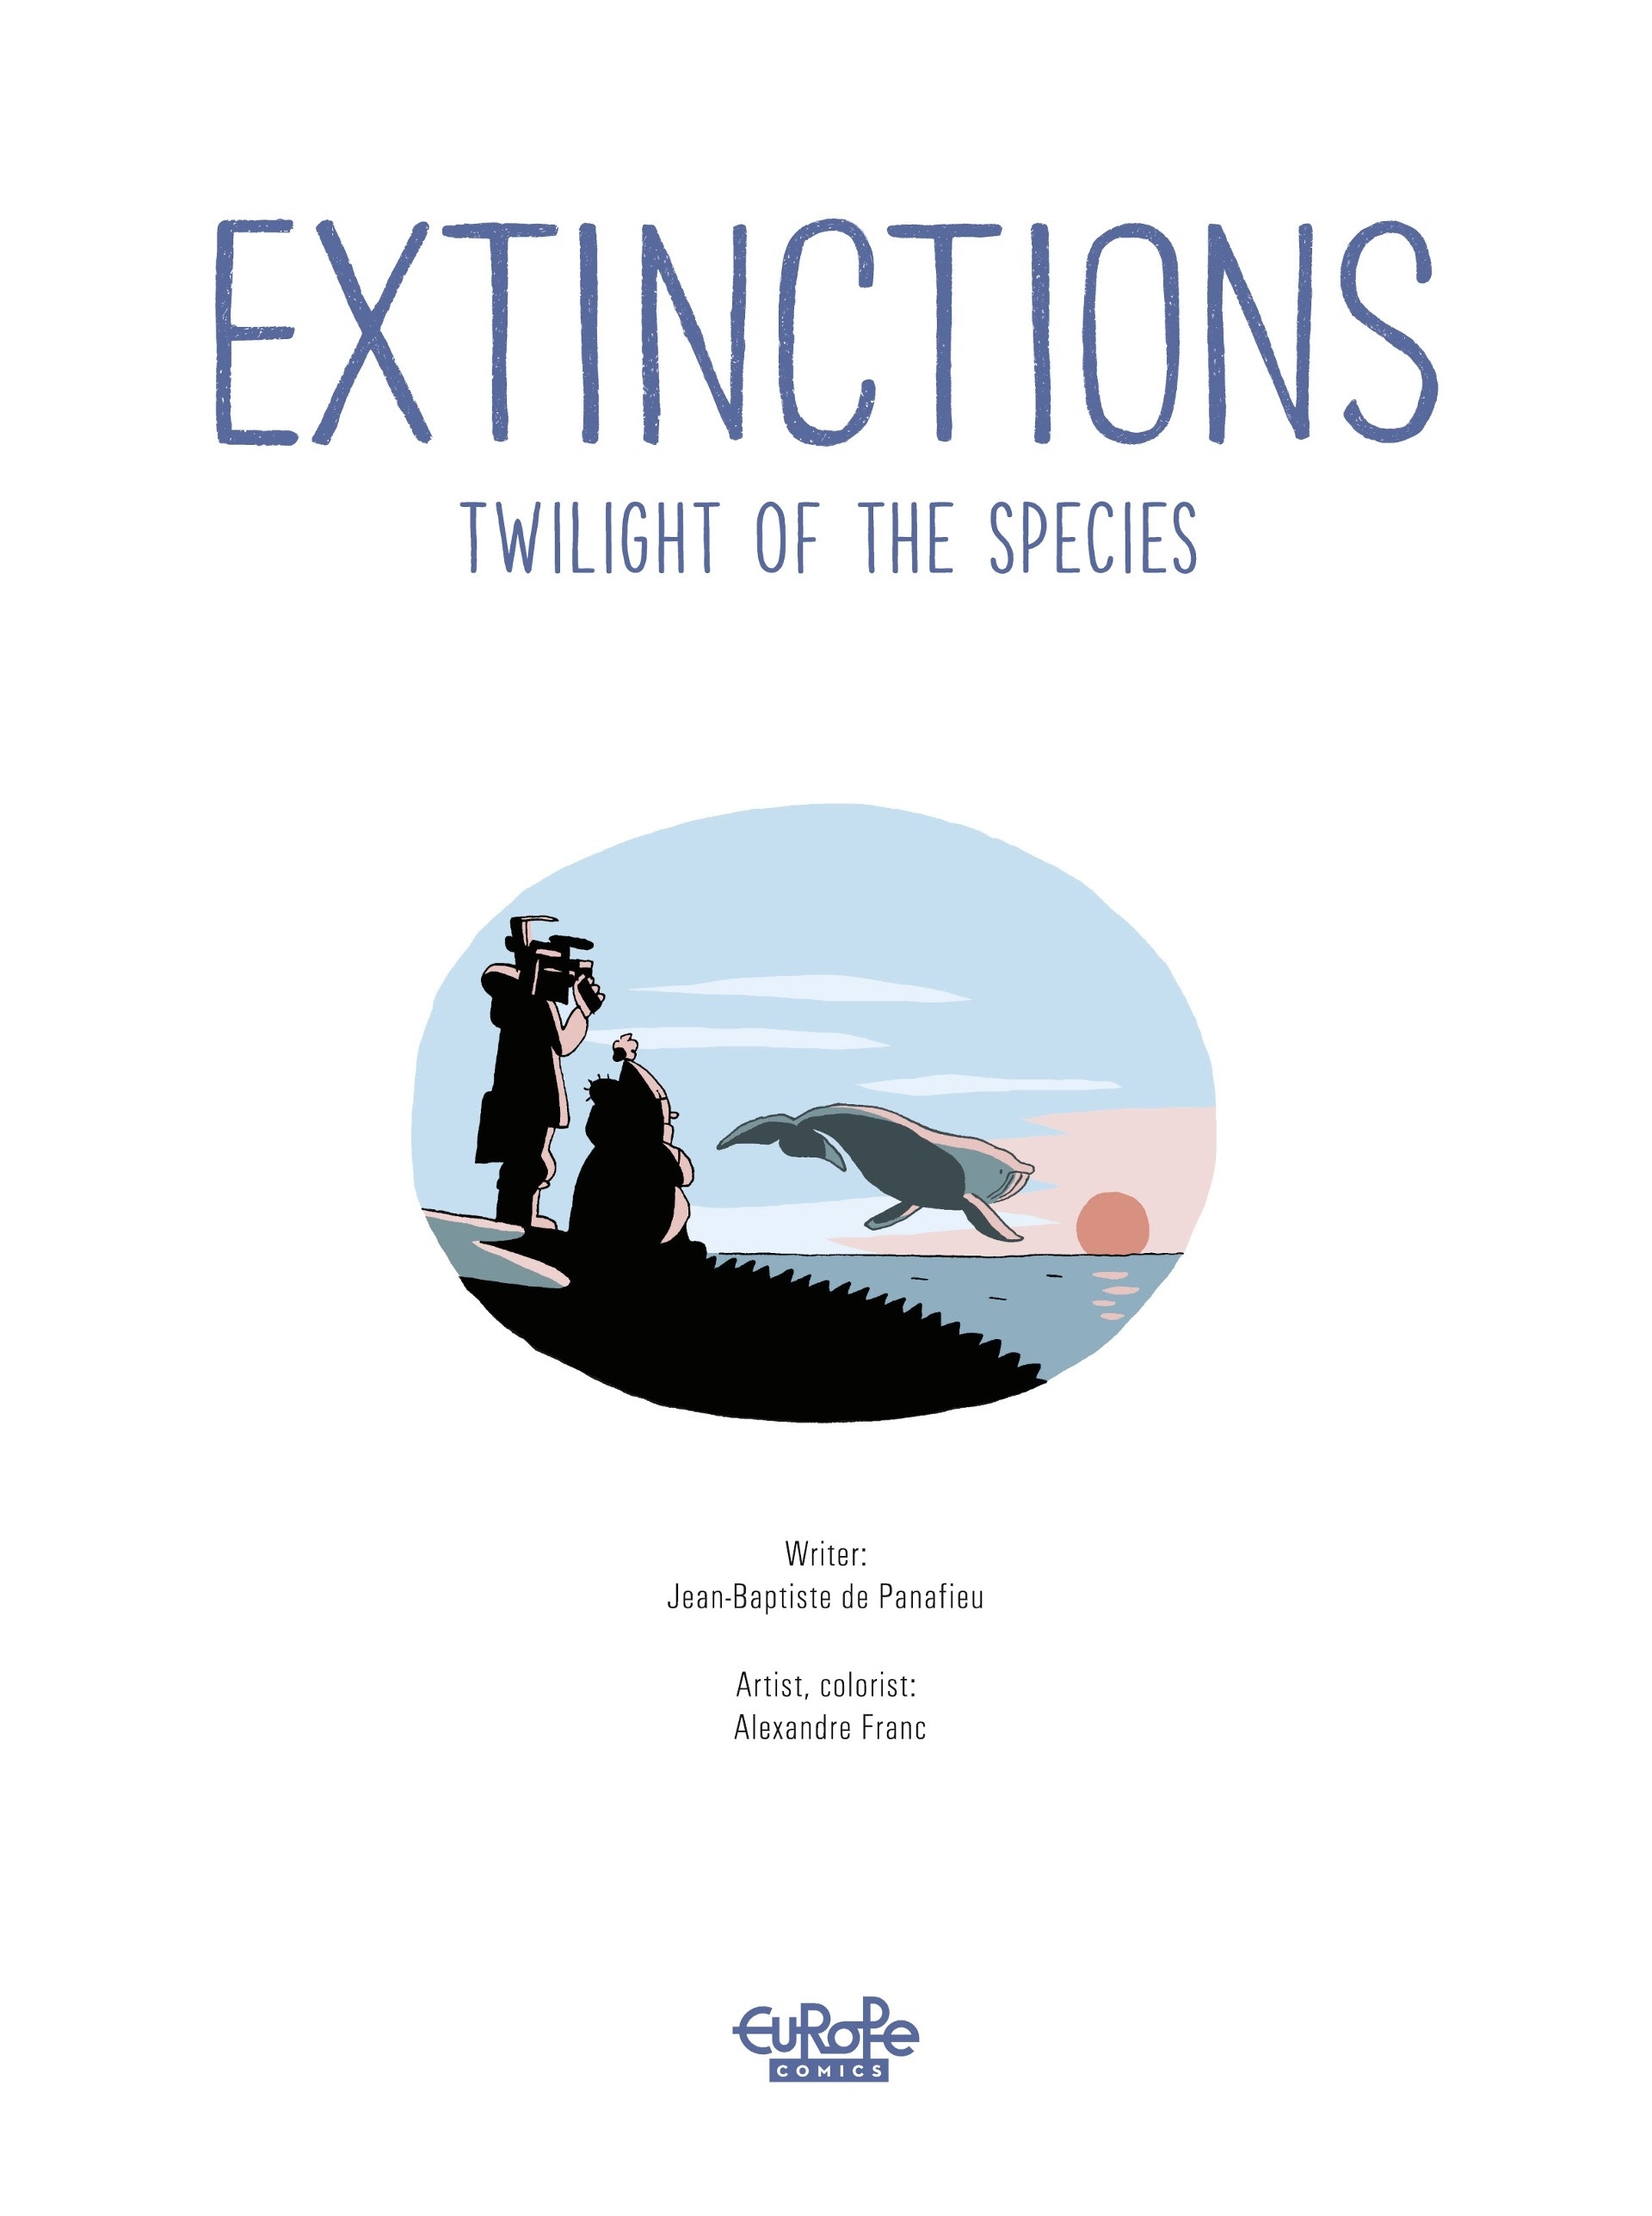 Read online Extinctions: Twilight of the Species comic -  Issue # TPB - 3